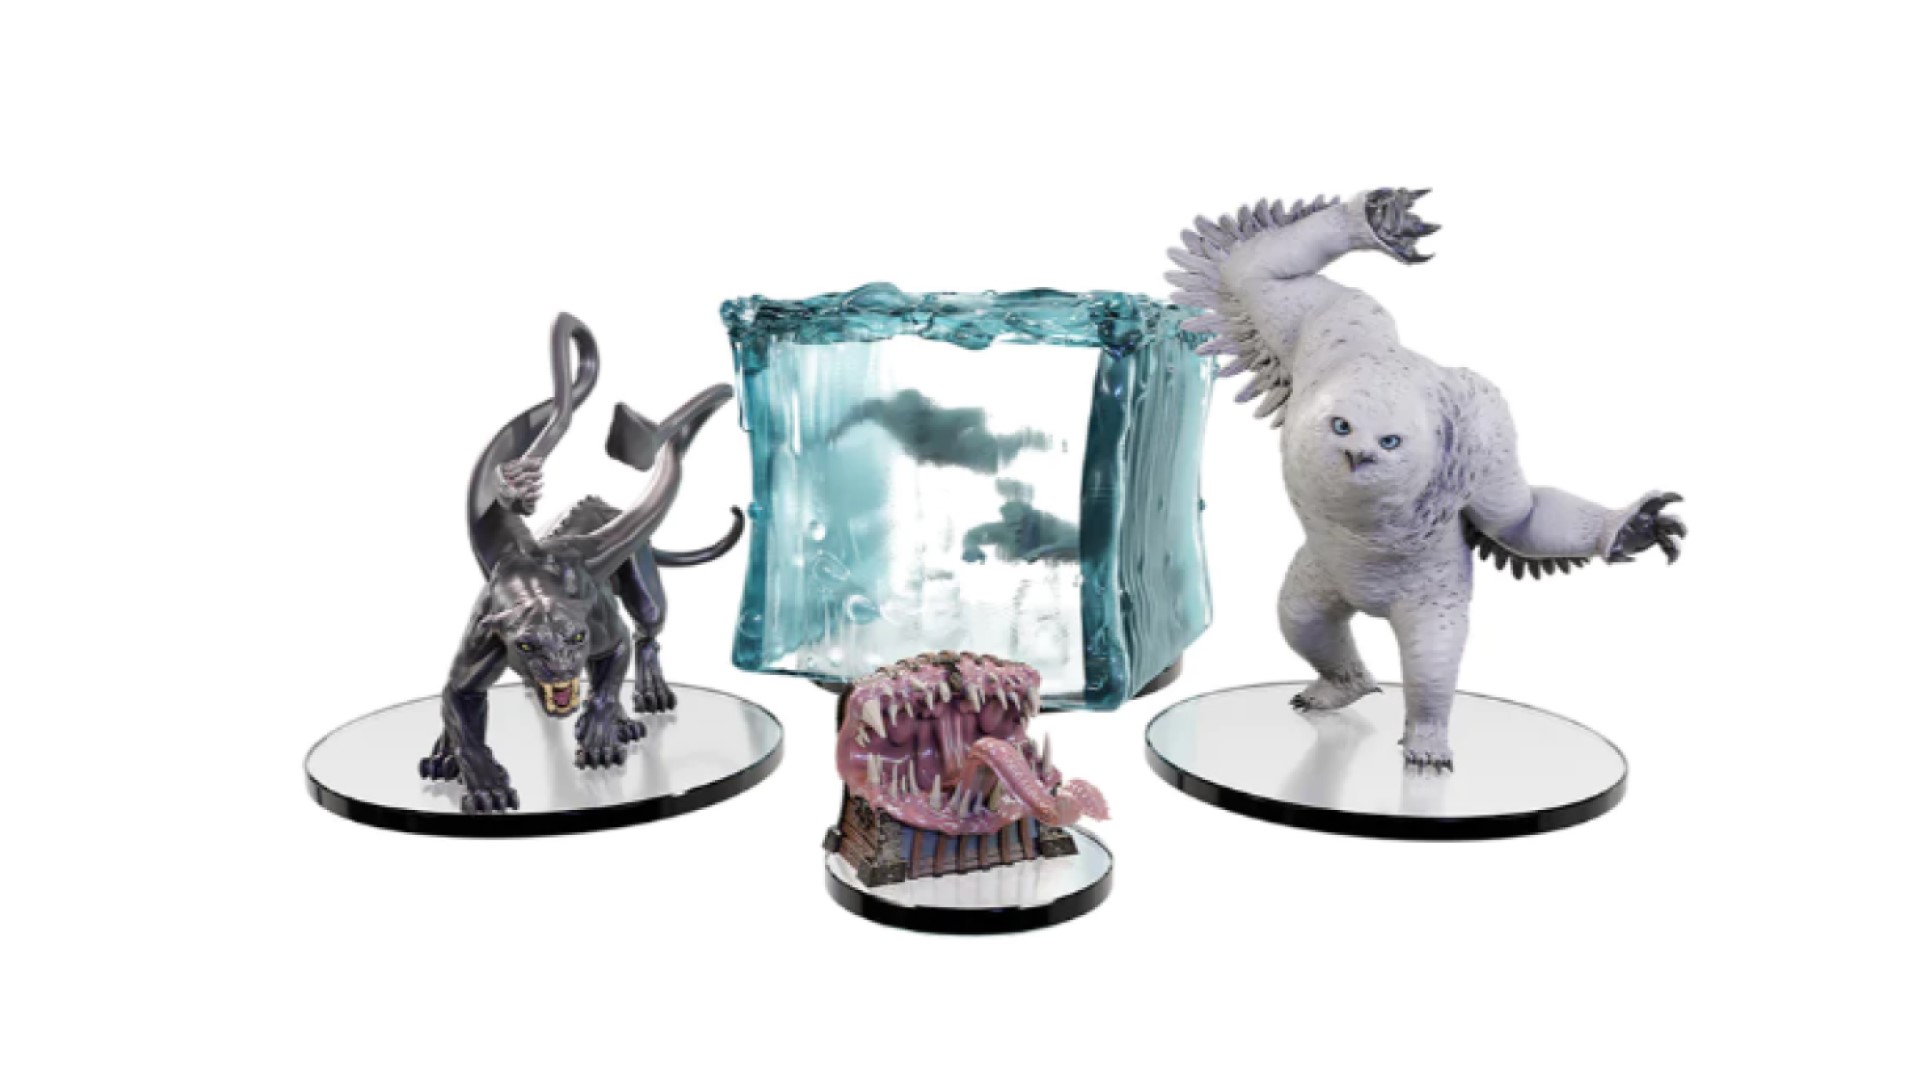 The DnD movie is getting official minis and plushes from Wizkids